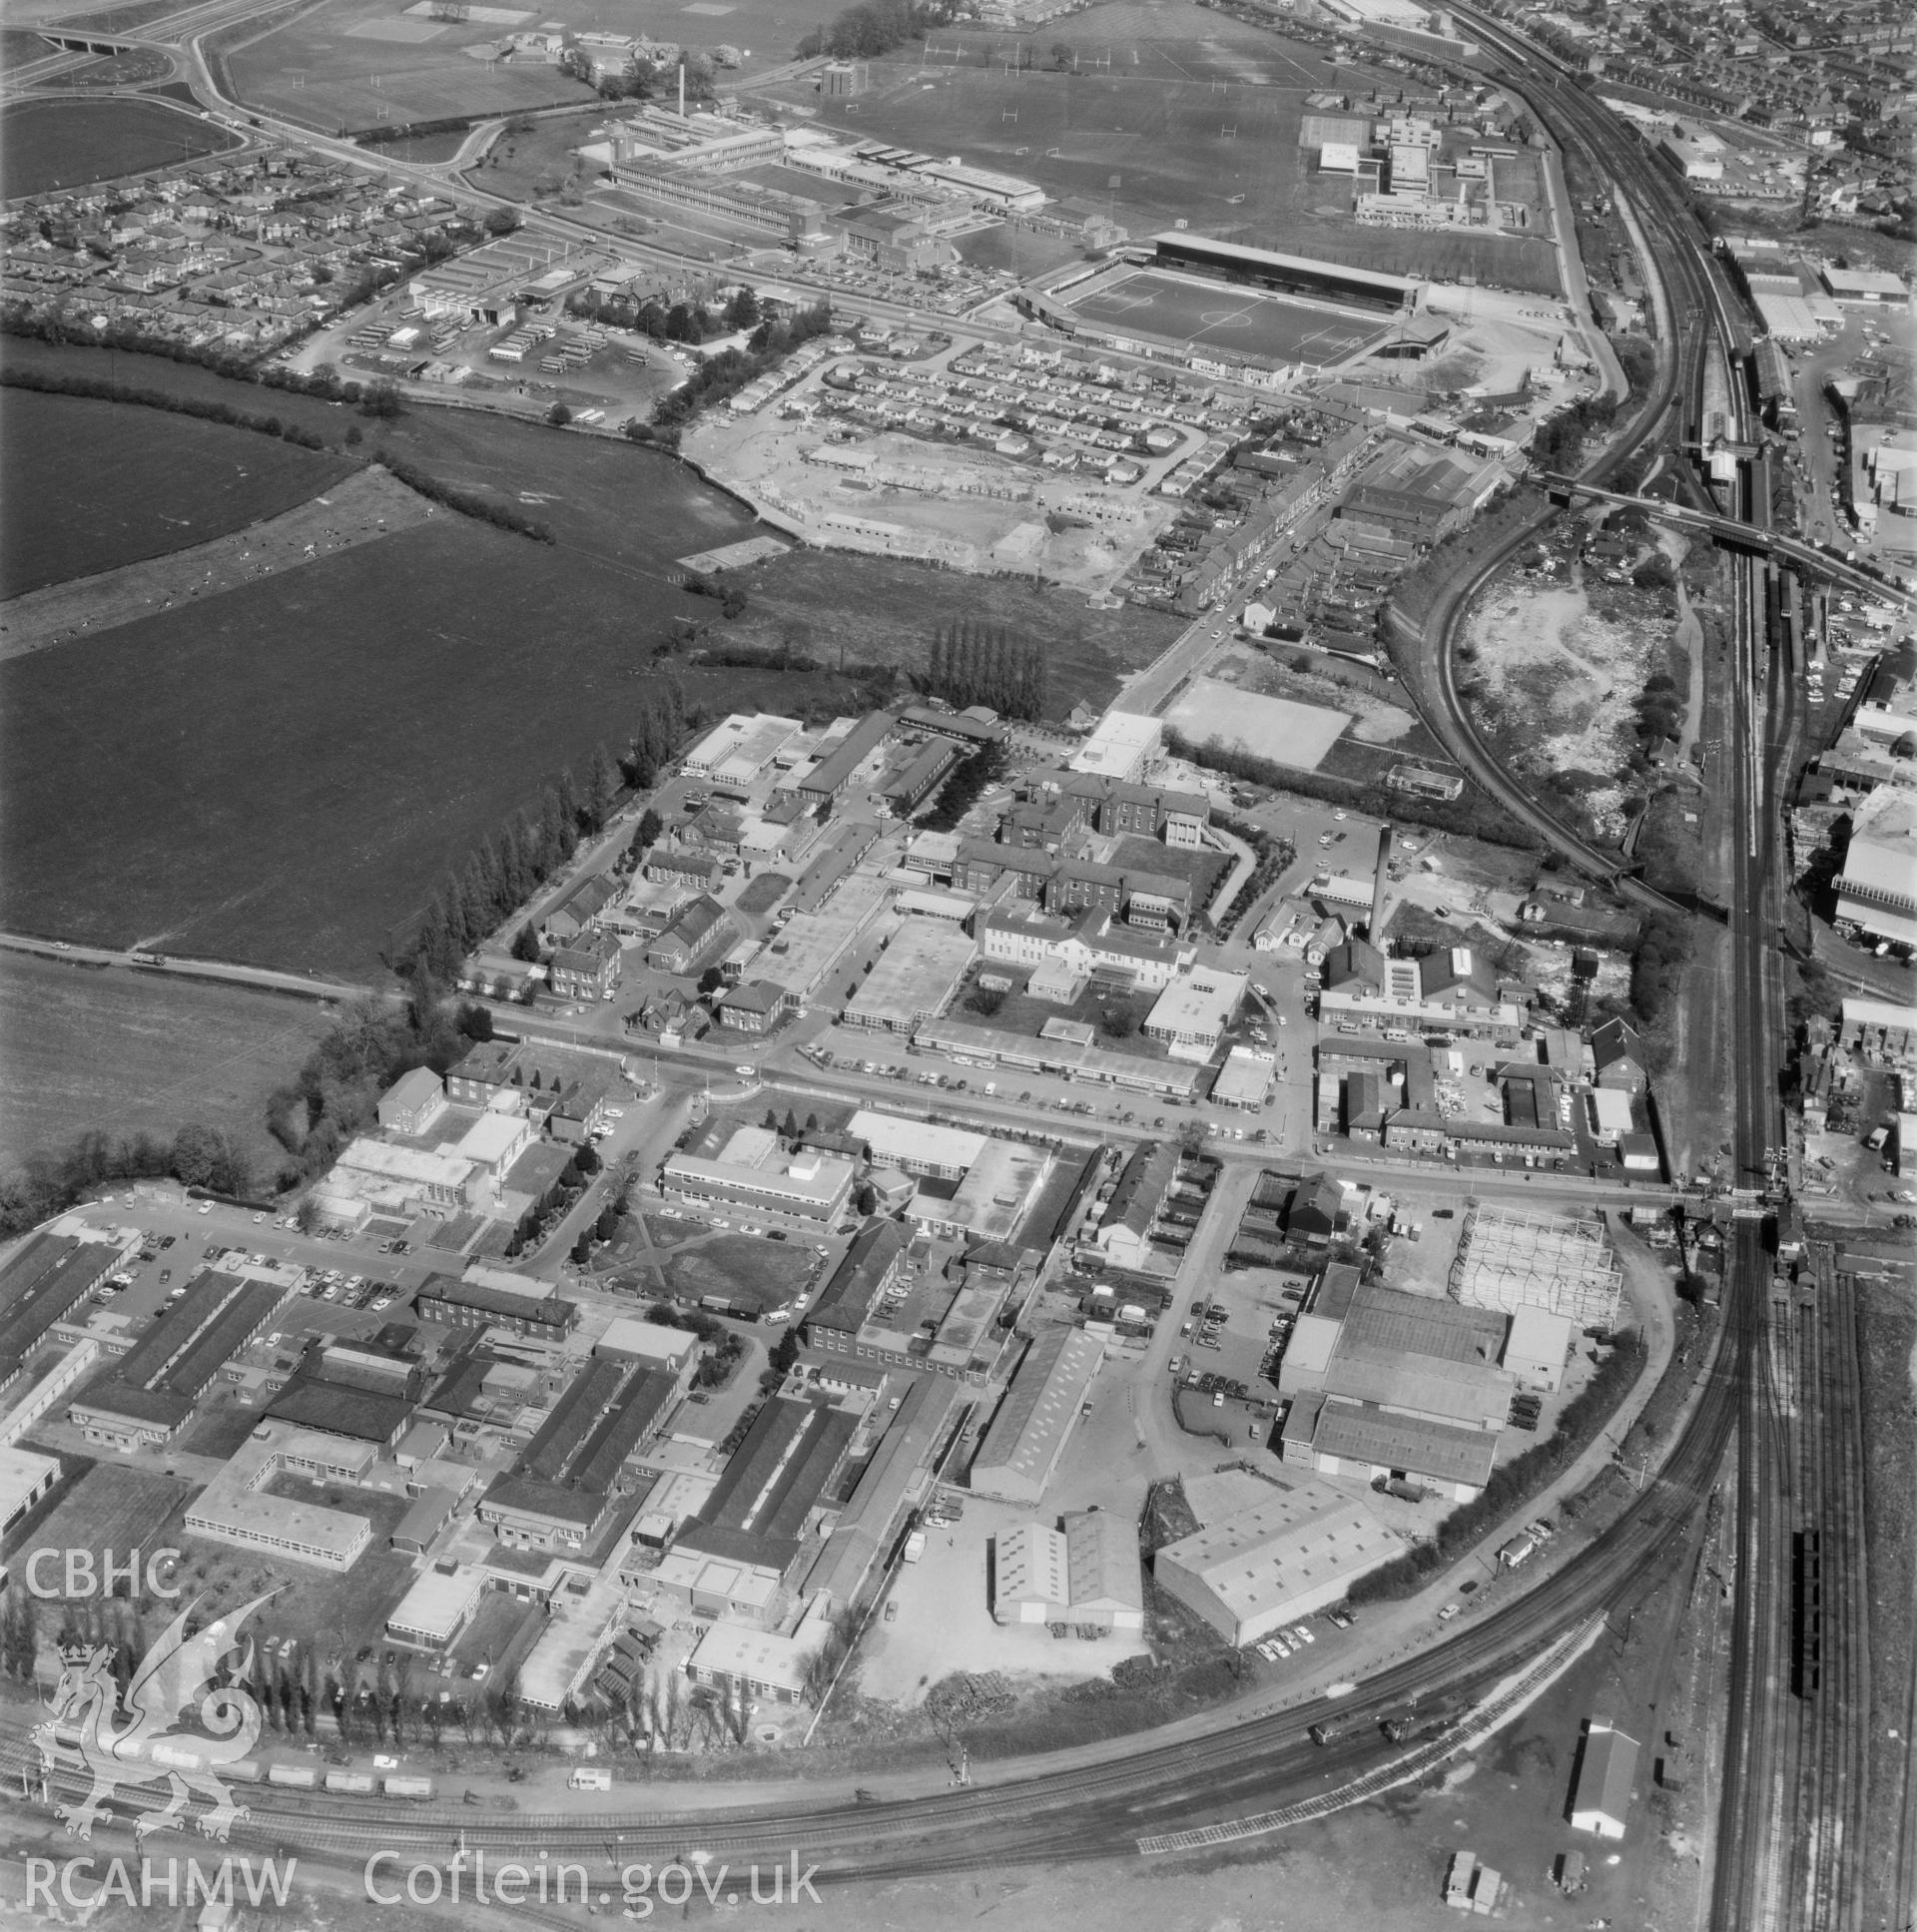 Black and white oblique aerial photograph showing the Croesnewydd area of Wrexham,  from Aerofilms album, taken by Aerofilms Ltd and dated 1977.